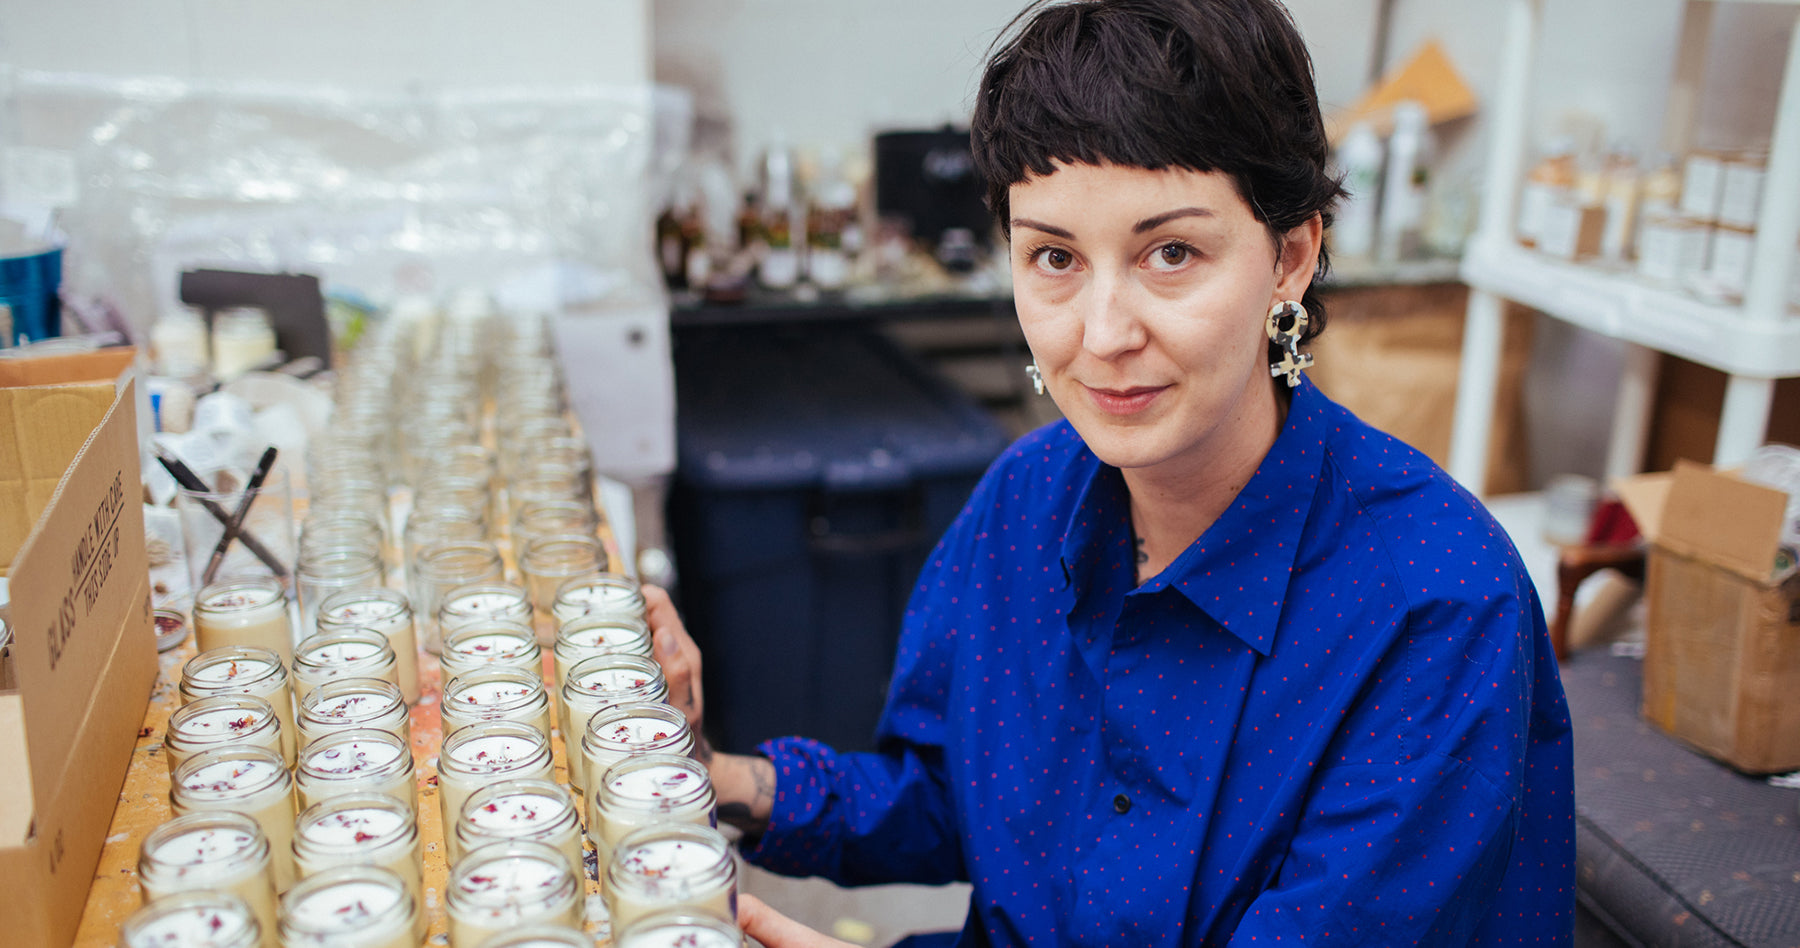 Kerry Butt, Founder and Candle Maker, RedSky Shop